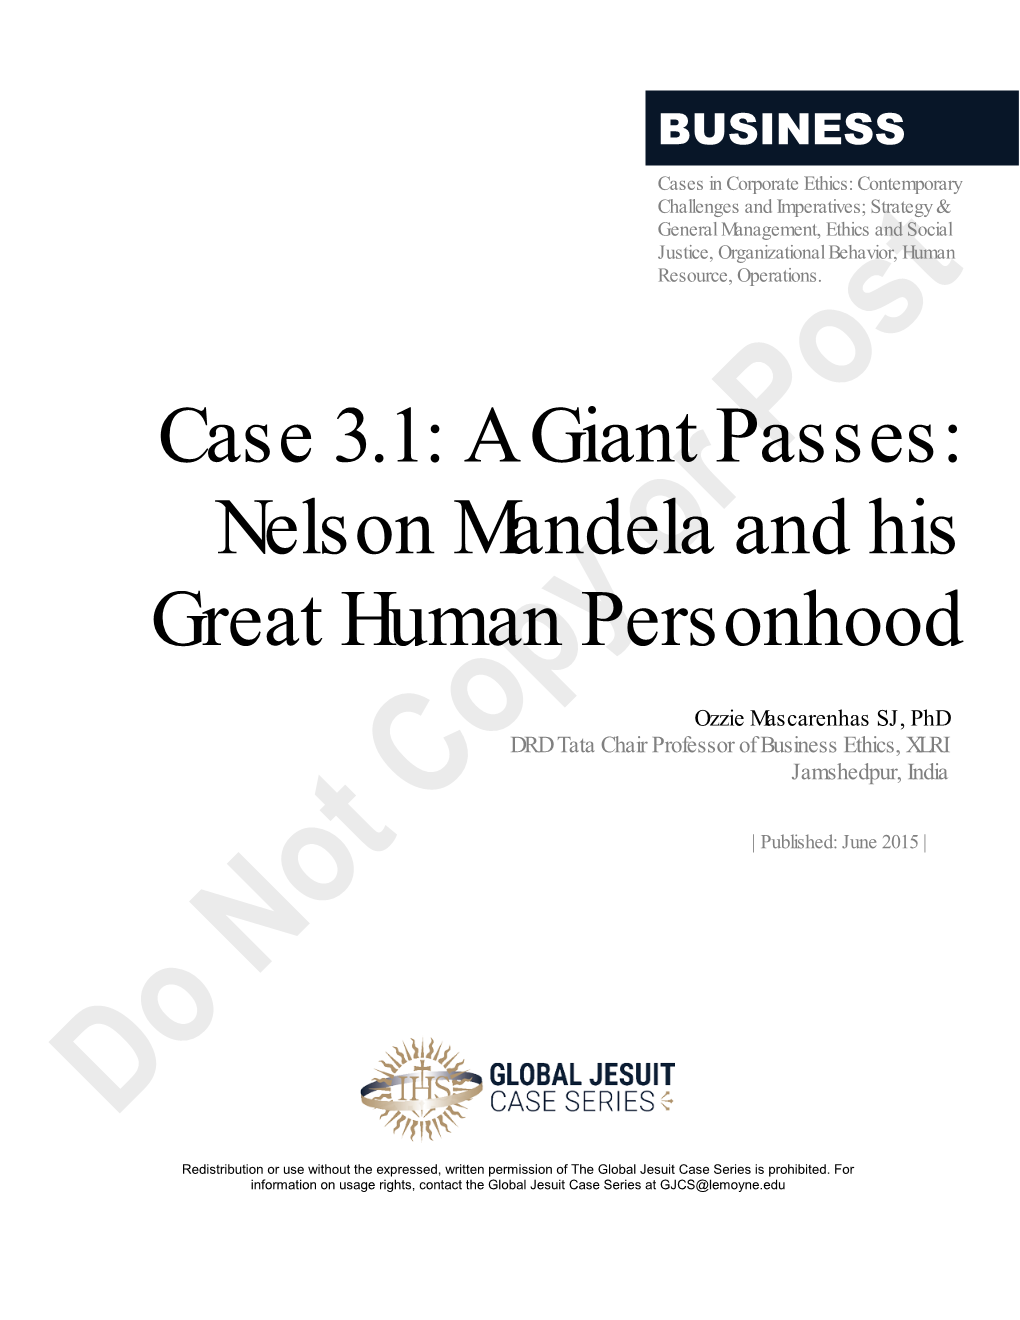 Nelson Mandela and His Great Human Personhood Corporate Human Person Case 3.2: Freedom Fighter, Doctor, Communist, Lakshmi Sahgal Business Case 3.3: Dr